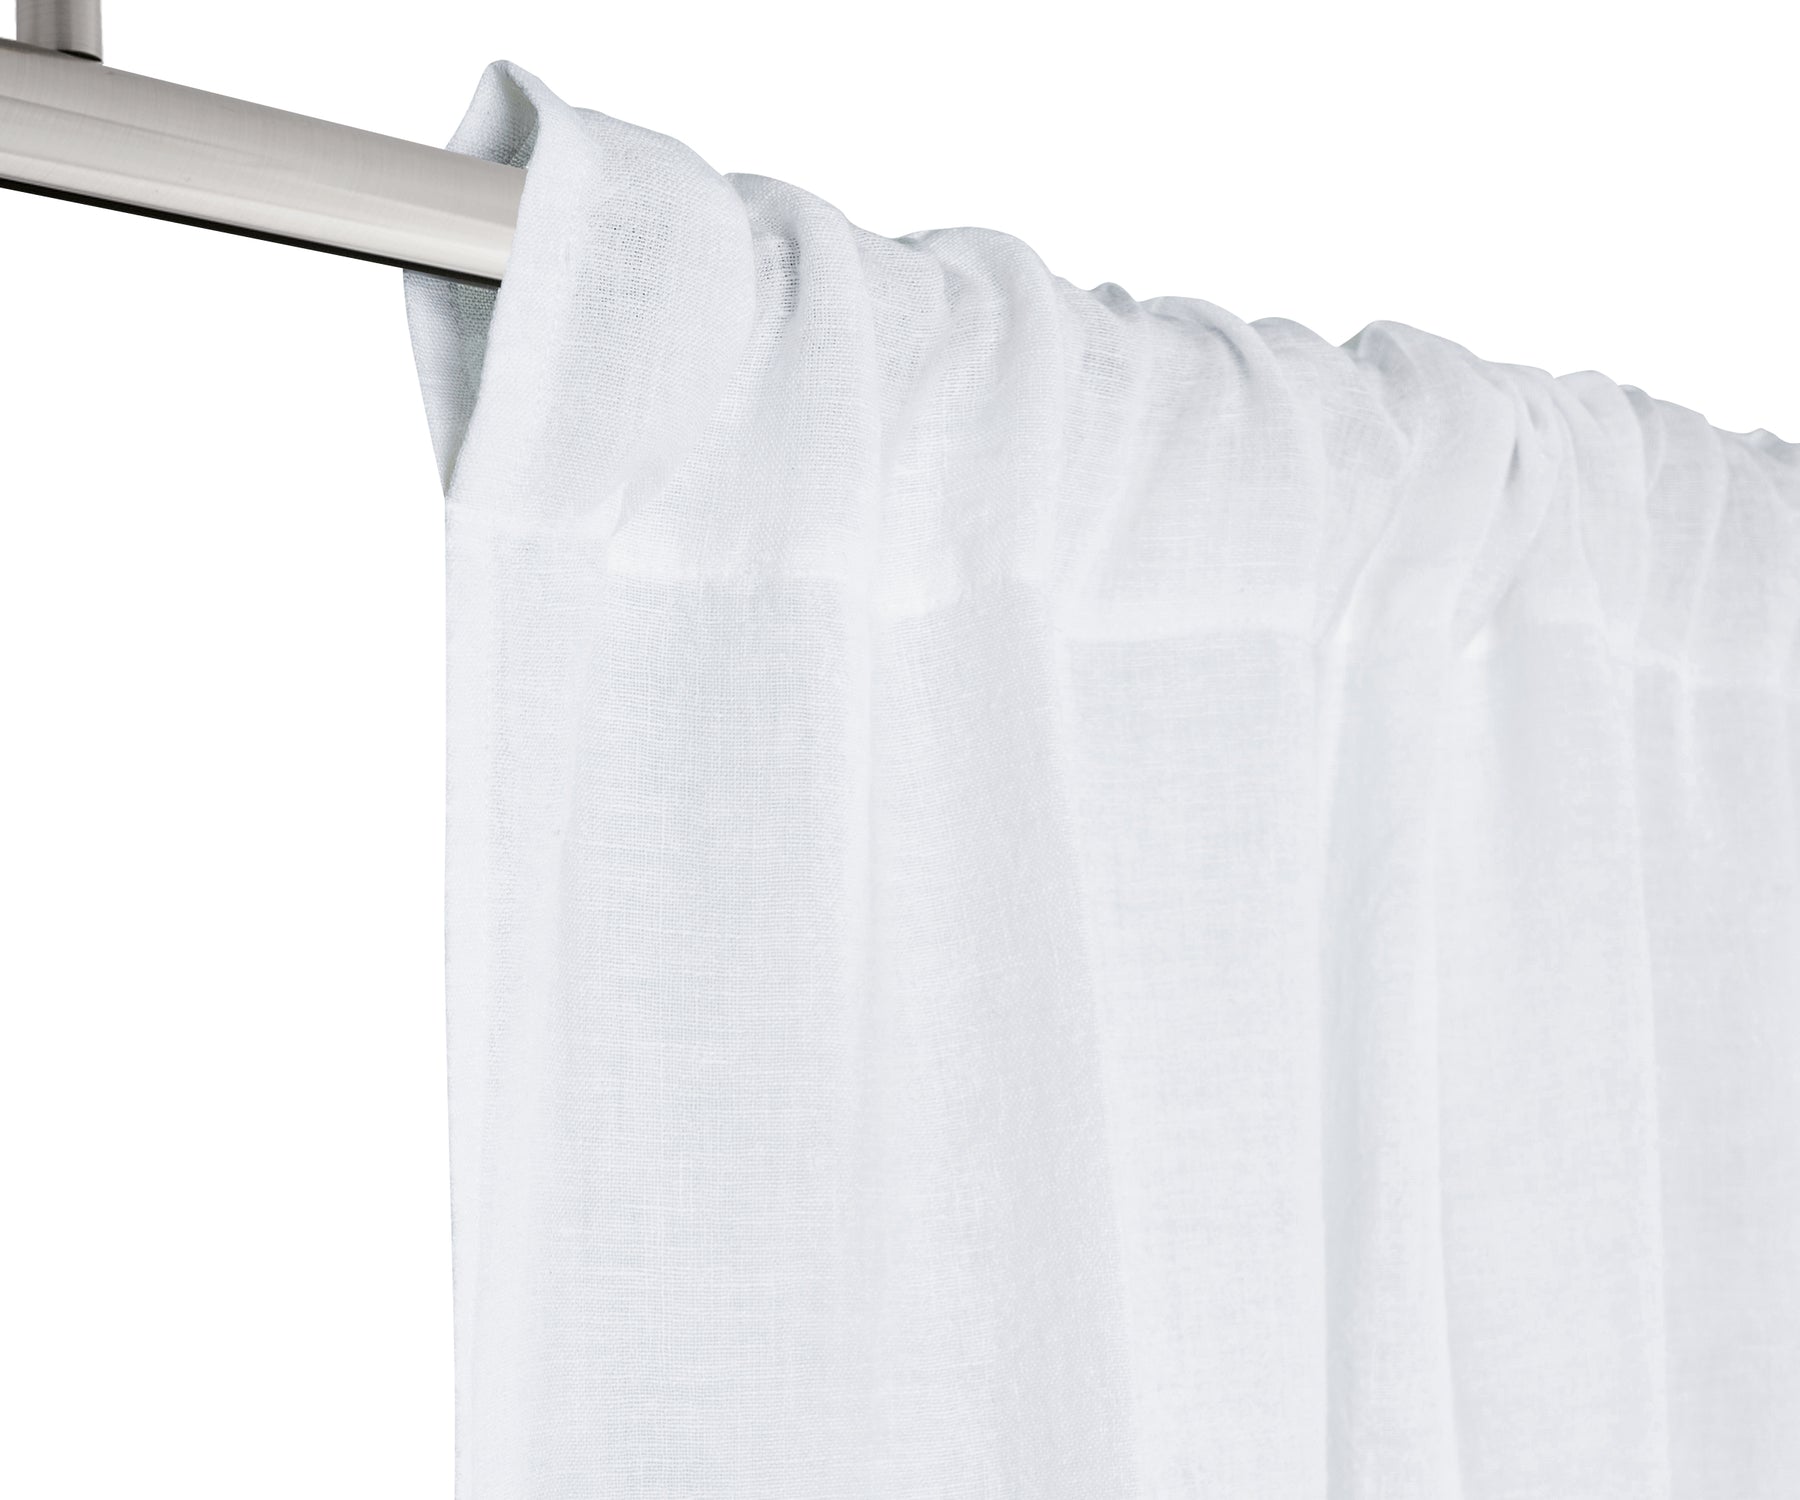 Experience luxury in your shower space with our high-quality linen shower curtain.